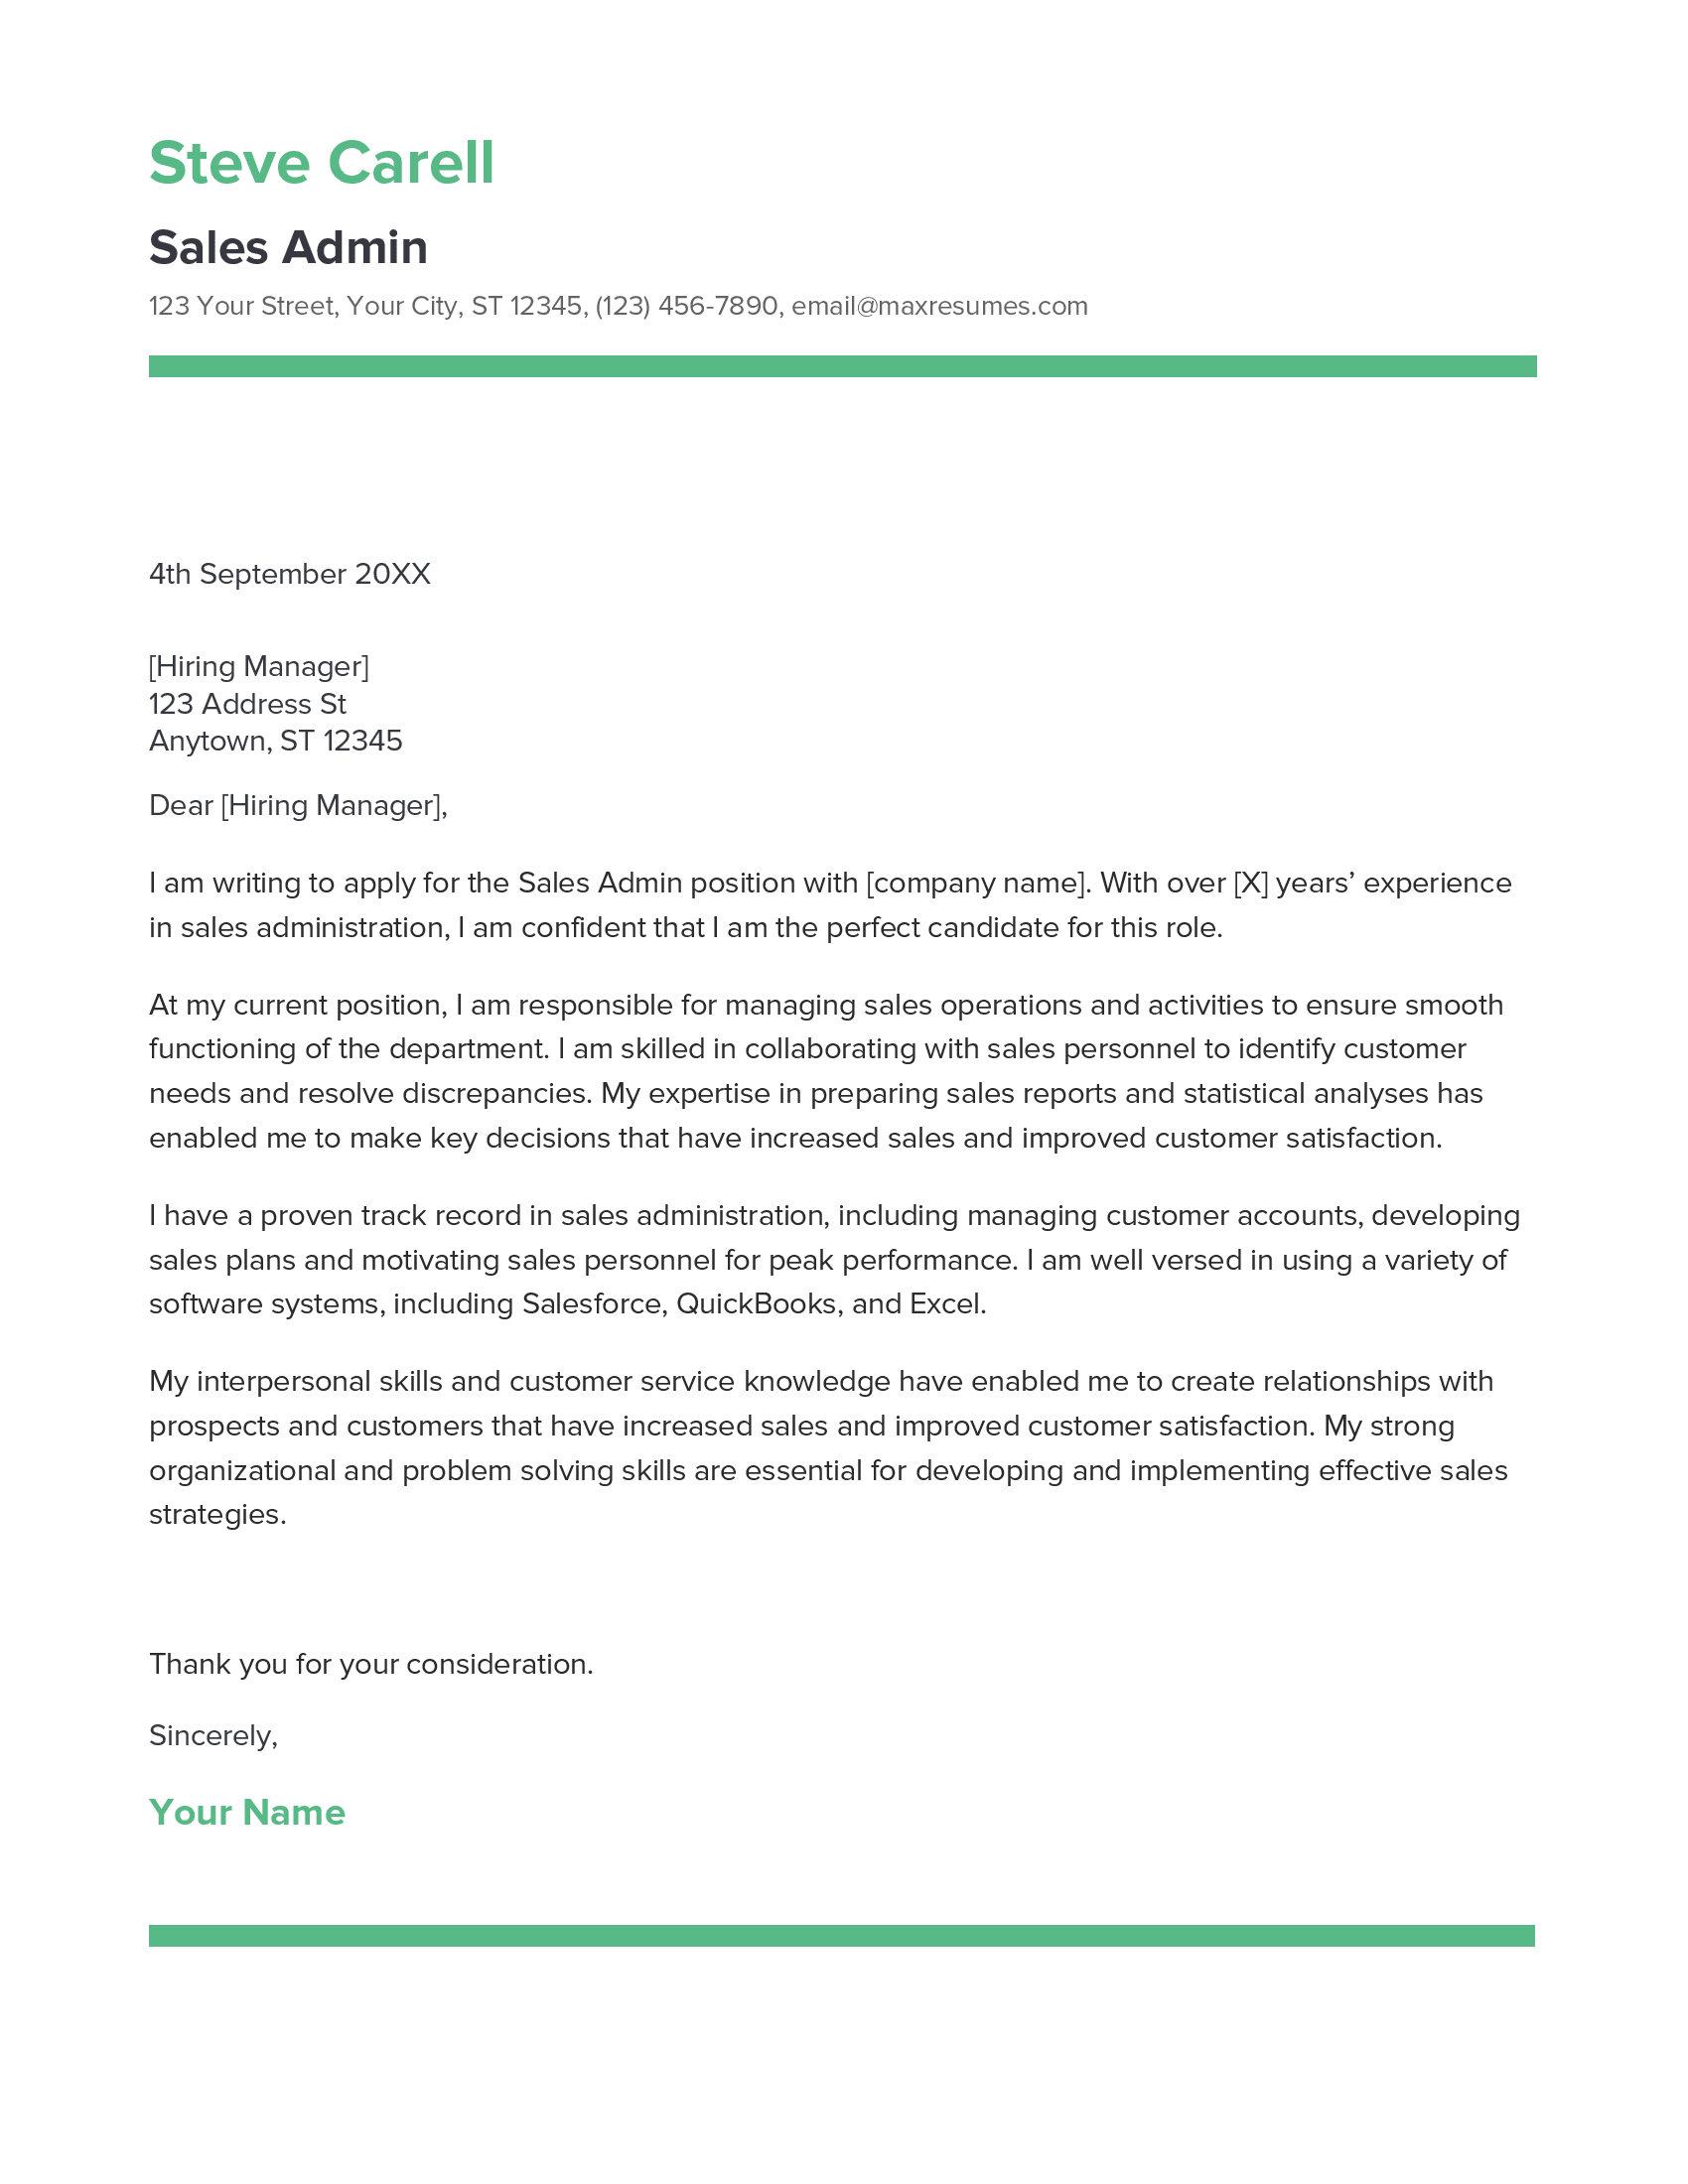 Sales Admin Cover Letter Example